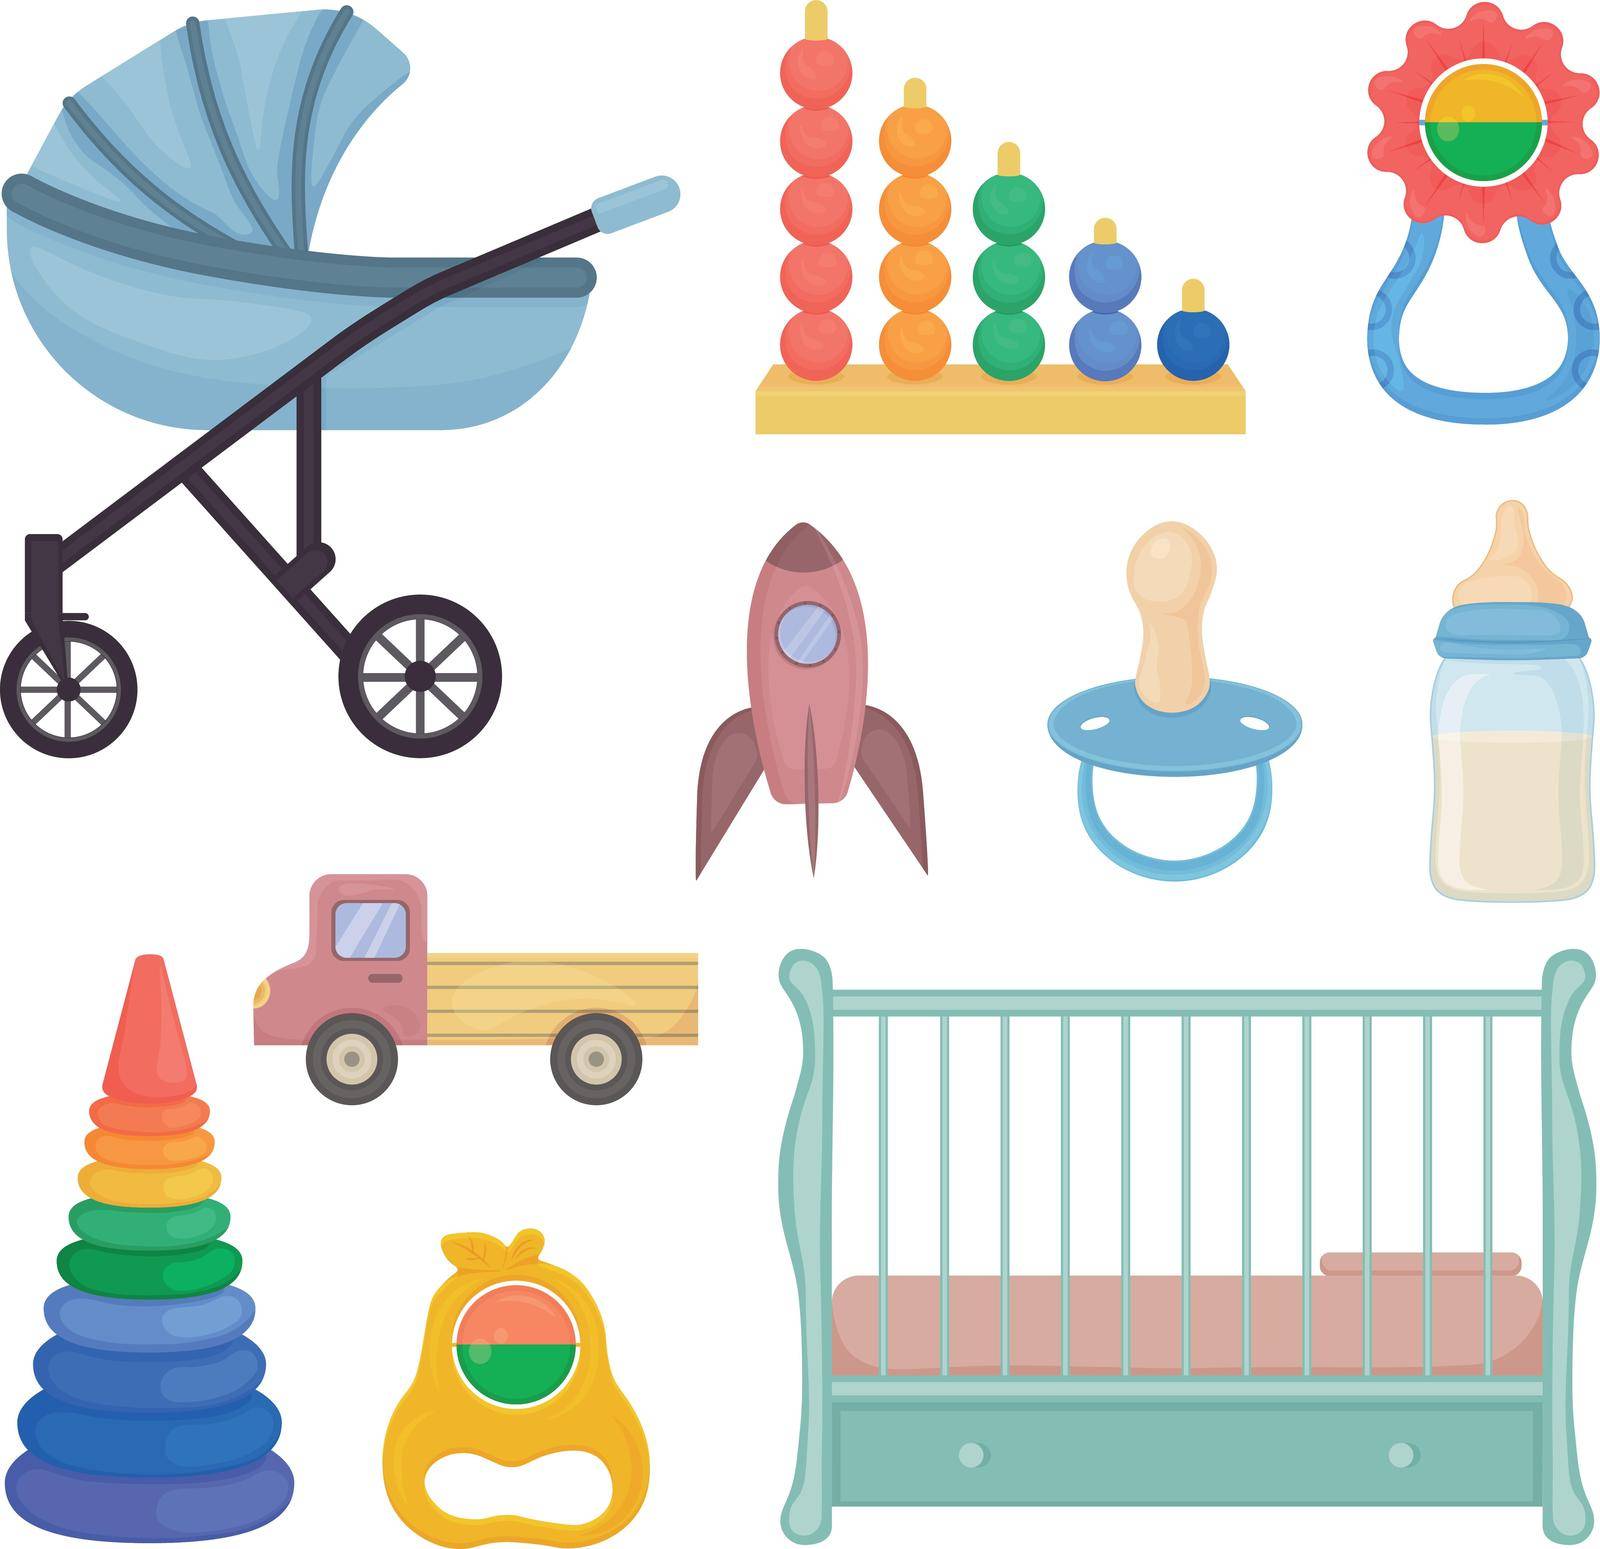 A set of baby accessories, such as a stroller, a rattle, a crib, a pacifier, a bottle and also children s toys. Collection of children s accessories. Vector illustration.